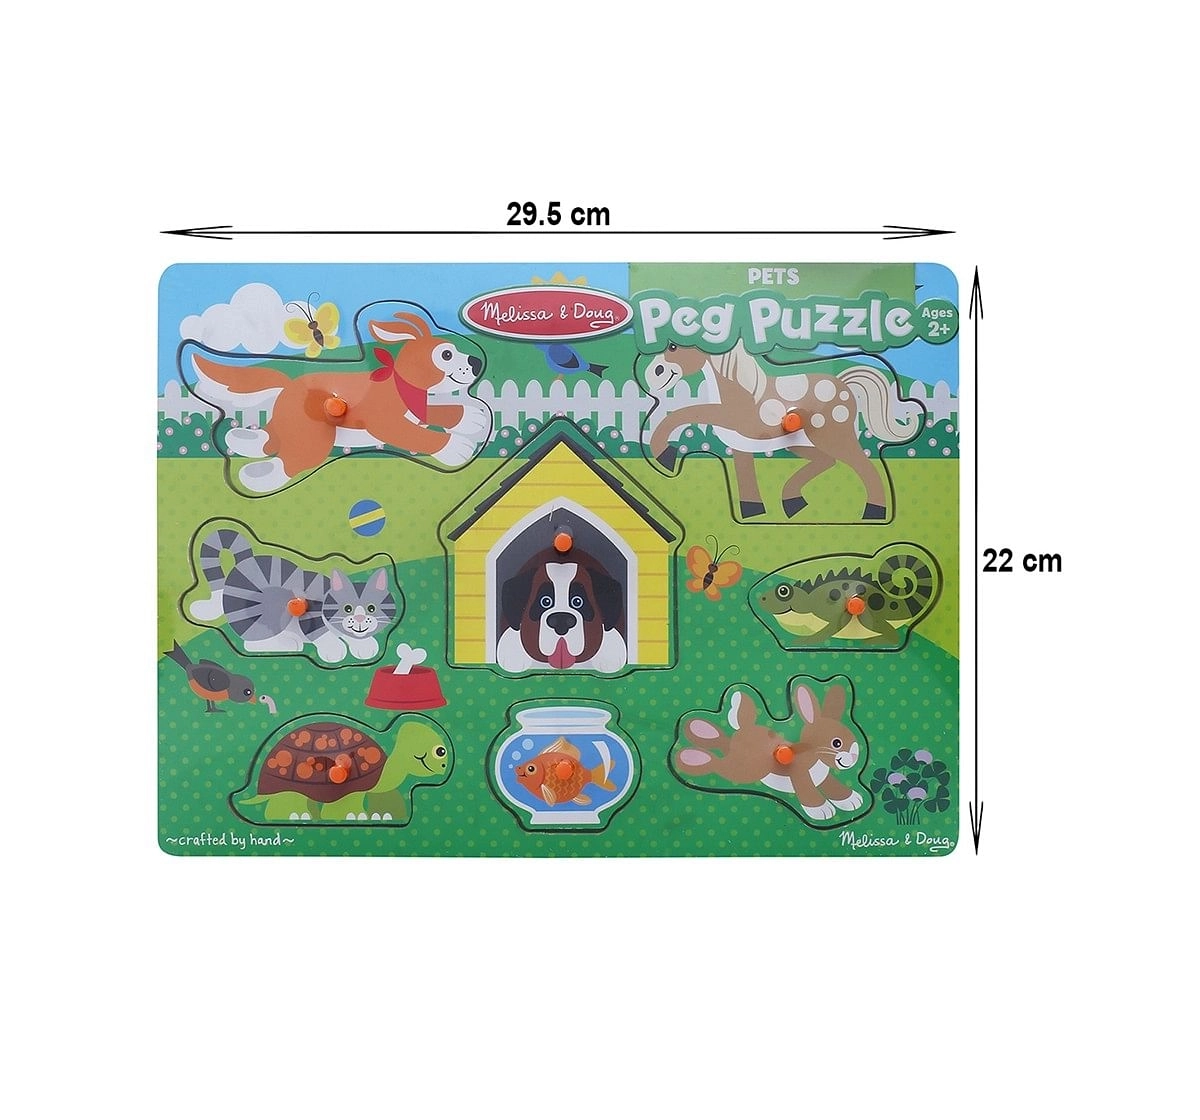 Melissa & Doug Pets Peg Puzzle (Colorful Animal Artwork, Extra-Thick Wooden Construction, 8 Pieces) Wooden Toys for Kids age 24M+ 